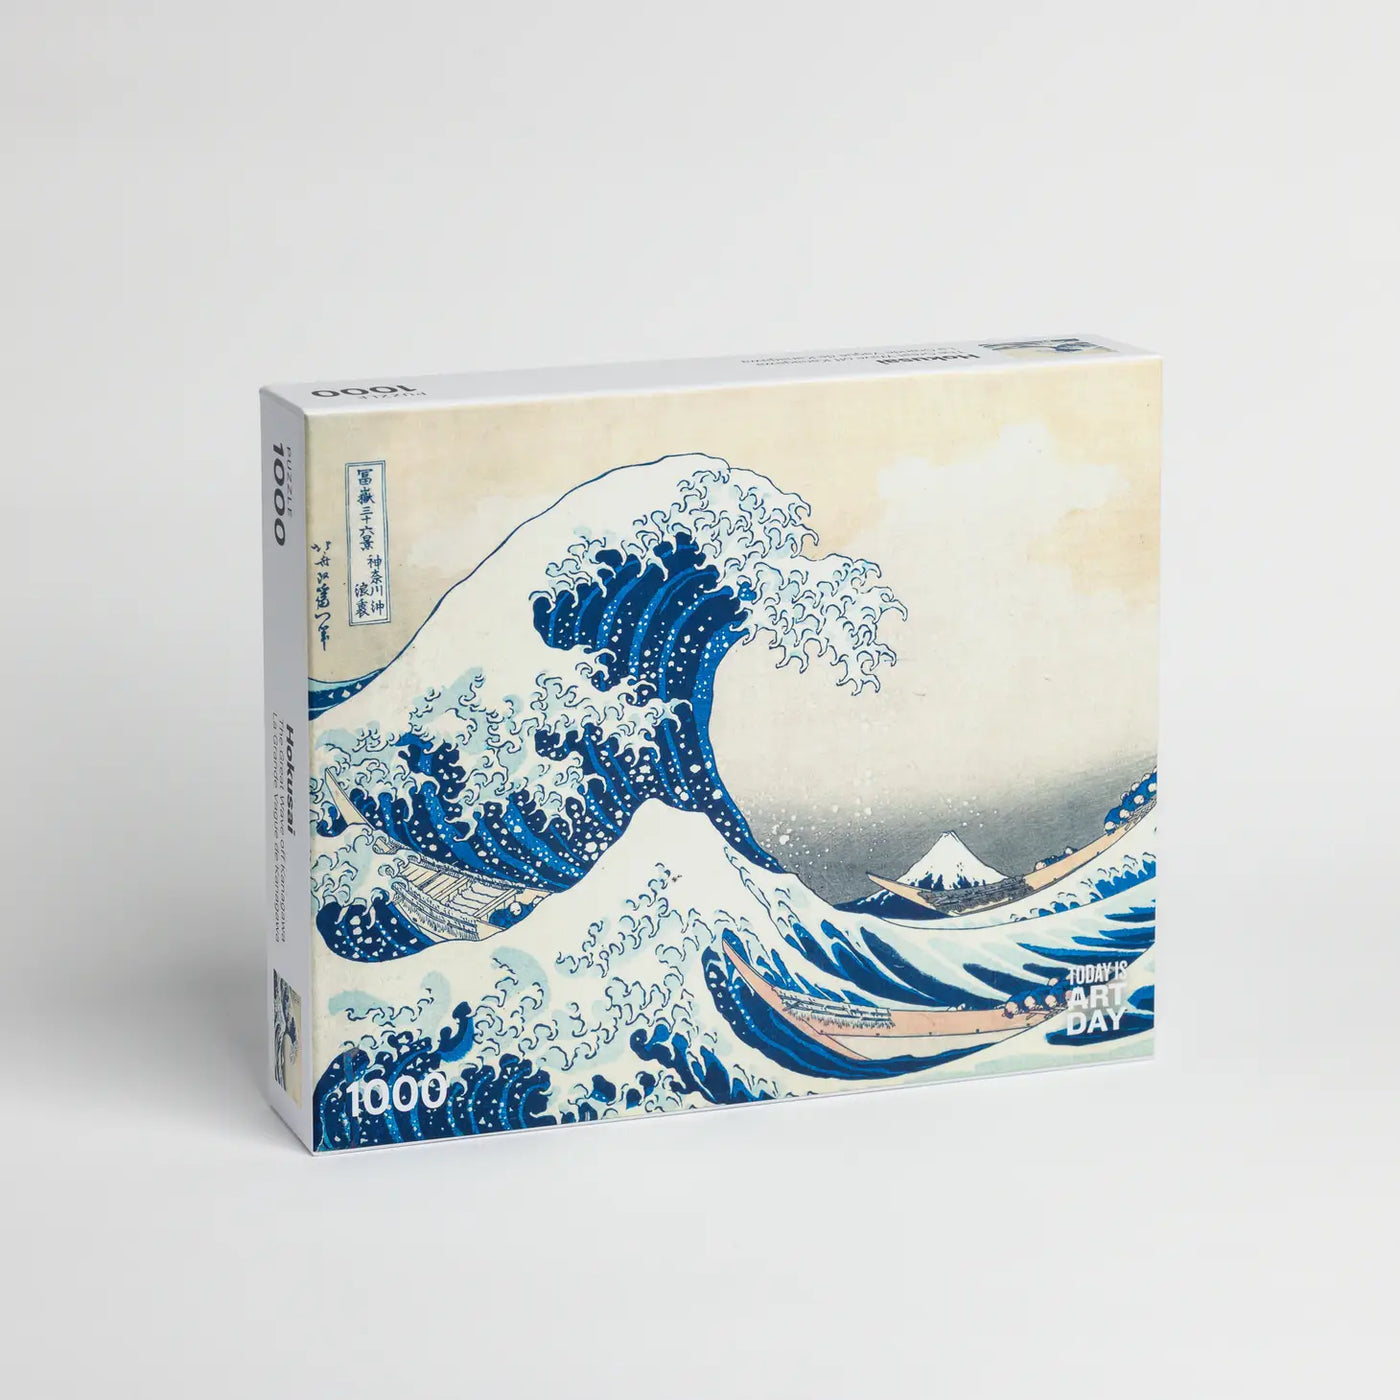 The Great Wave Off Kanagawa is a woodblock print by the Japanese ukiyo-e artist Hokusai. It is part of Hokusai’s thirty-six views of Mount Fuji series that secured his fame both in Japan and overseas. The mountain with a snow-capped peak is Mount Fuji, which in Japan is considered sacred and a symbol of national identity. Sometimes assumed to be a tsunami, the wave is more likely to be a large rogue wave. It is about to strike three boats, symbolizing the force of nature and the weakness of human being